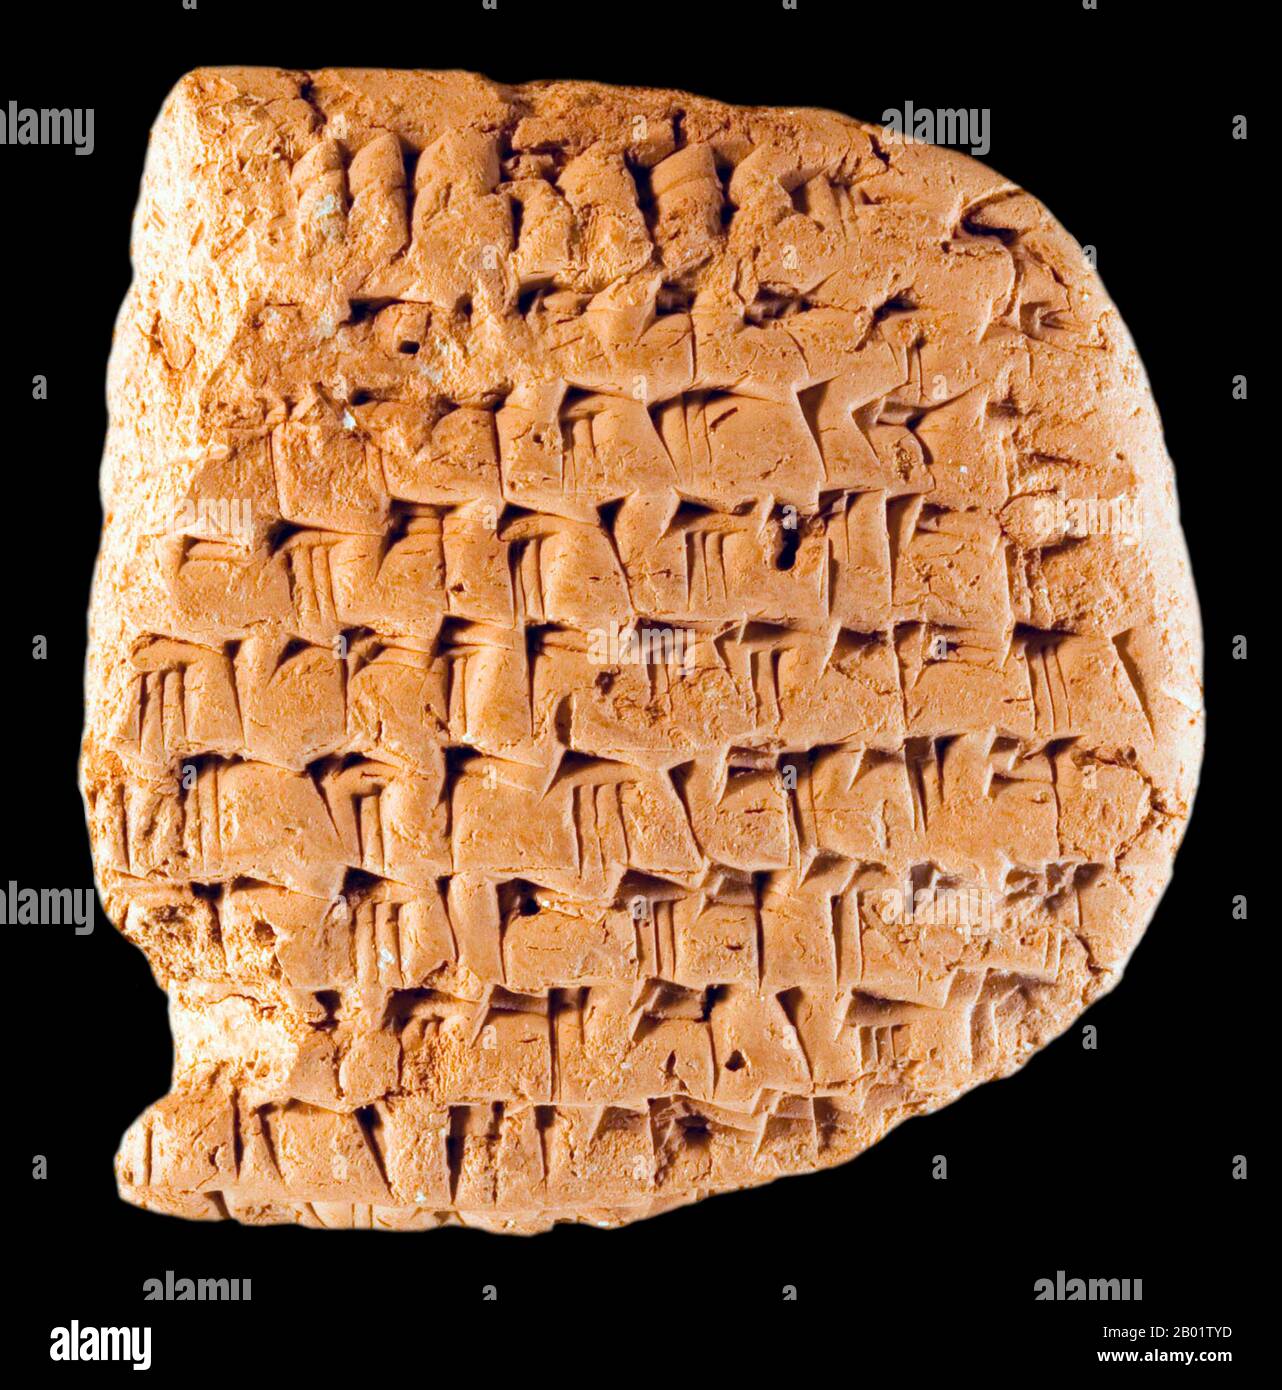 Iran/Persia: A tablet from the Persepolis Fortification Archive, 509-493 BCE. Photo by اردشیر خسروی (CC BY-SA 4.0 License).  The Persepolis Fortification Archive and Persepolis Treasury Archive are two groups of clay administrative archives - sets of records physically stored together - found in Persepolis (Old Persian: Pârsa, Modern Takht-e Jamshid in Fars near Shiraz in southwestern Iran) dating to the Persian Achaemenid Empire.  The discovery was made during legal excavations conducted by the archaeologists from the Oriental Institute of the University of Chicago in the 1930s. Stock Photo